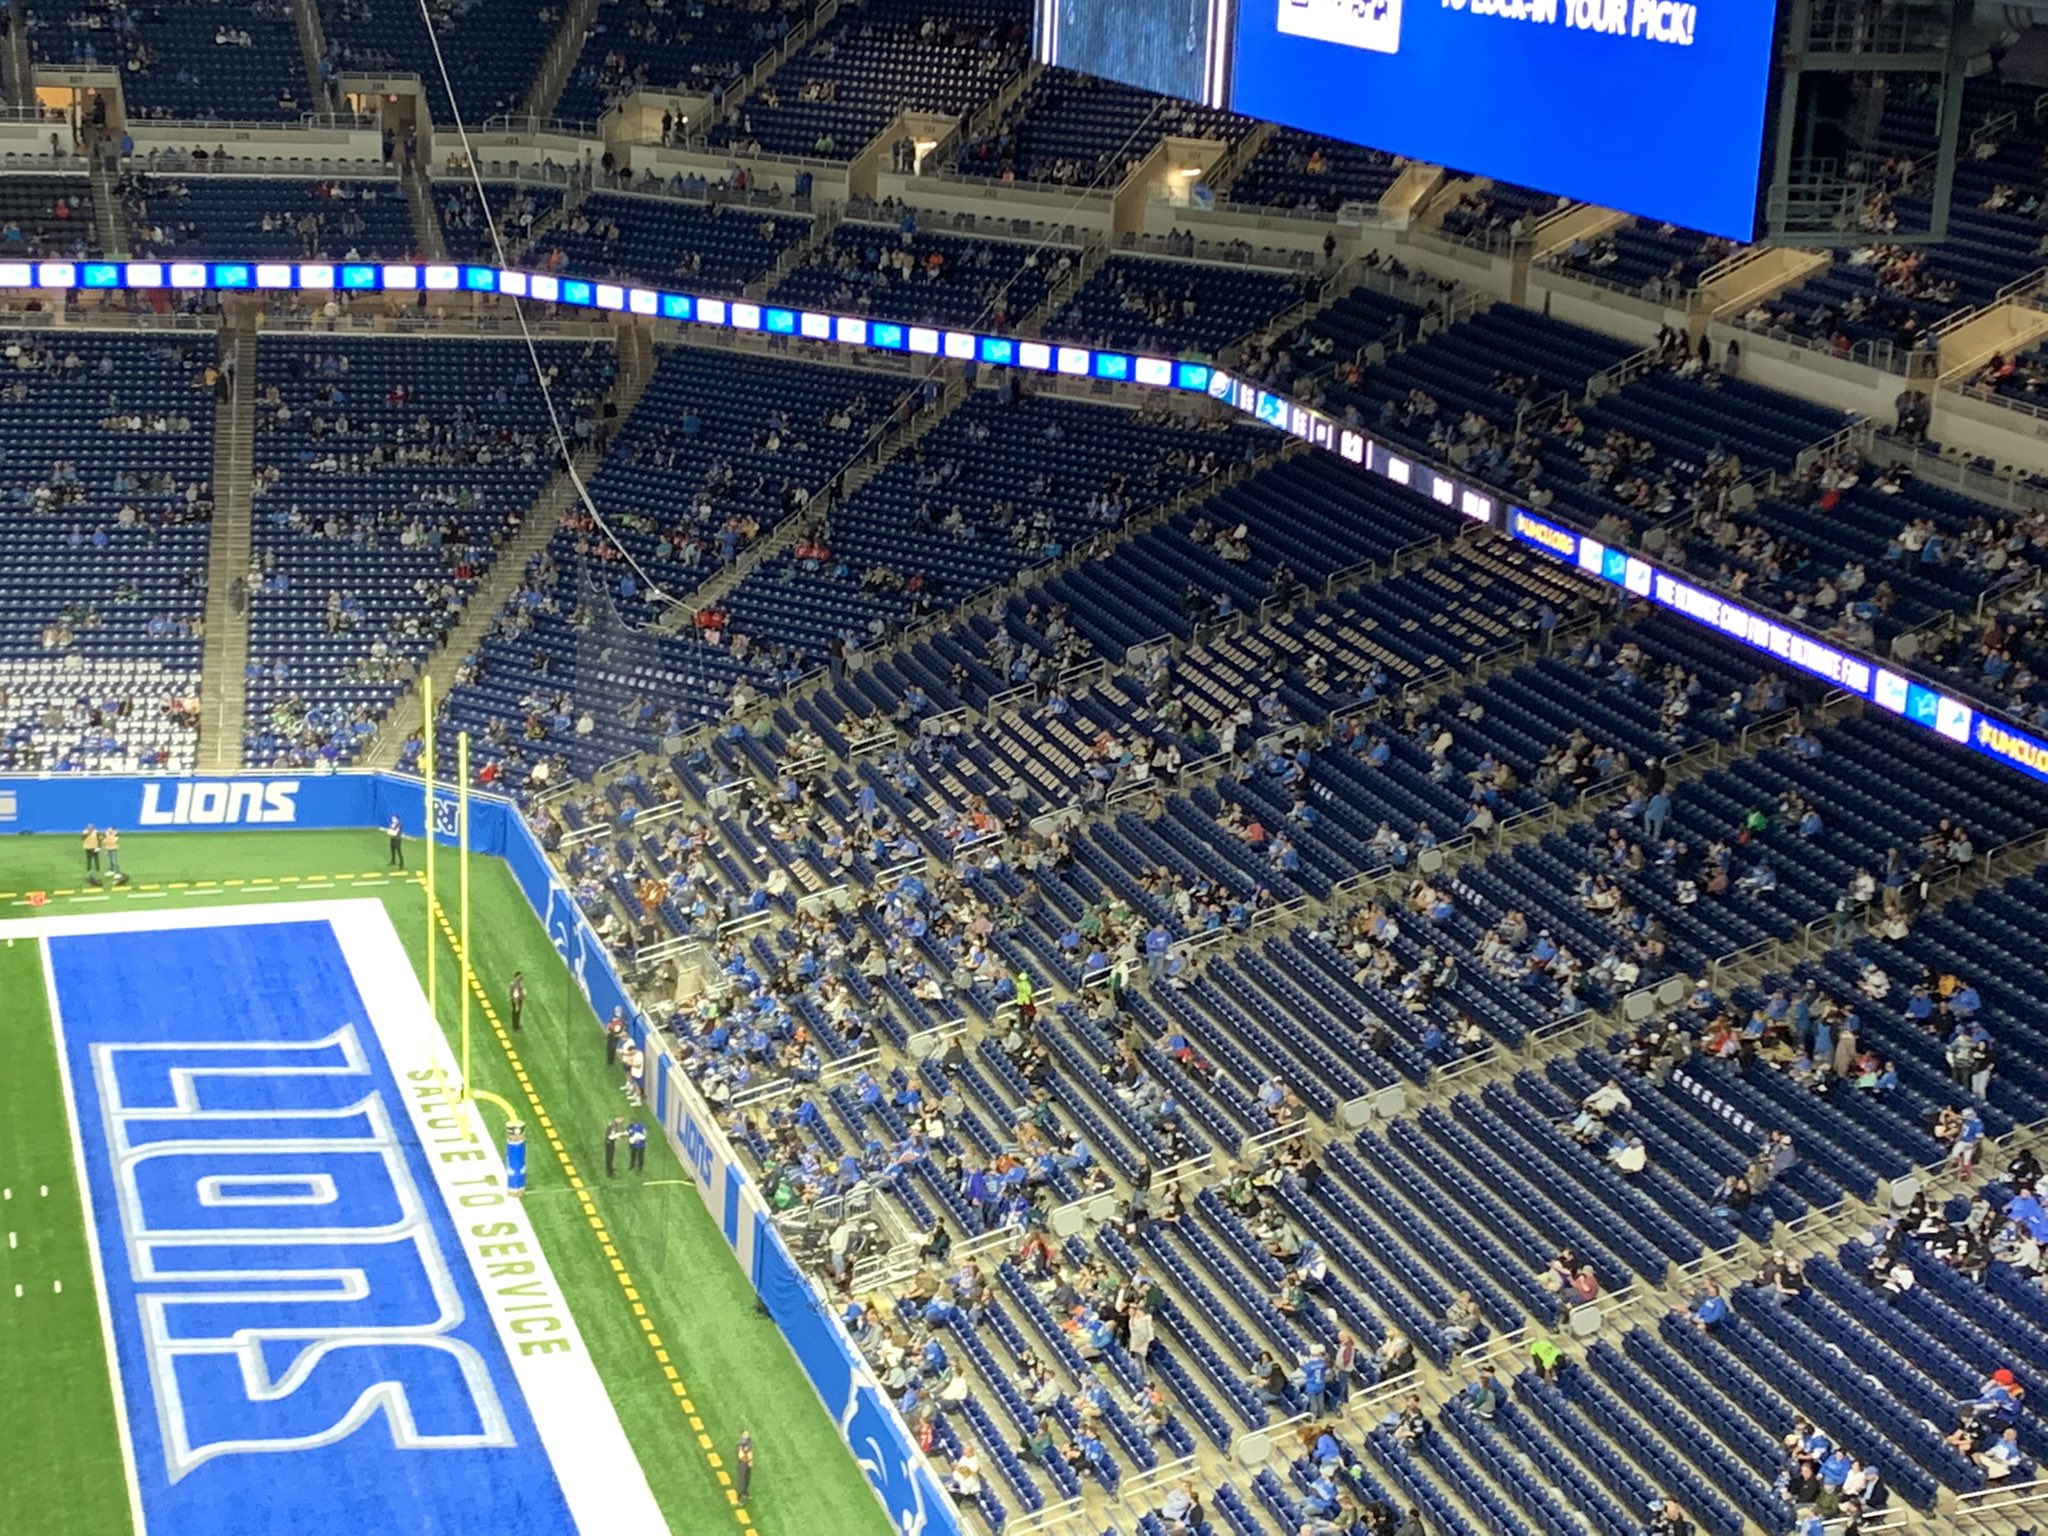 Paula Pasche on X: 'Plenty of empty seats with 20 minutes until game time  at Ford Field.  / X